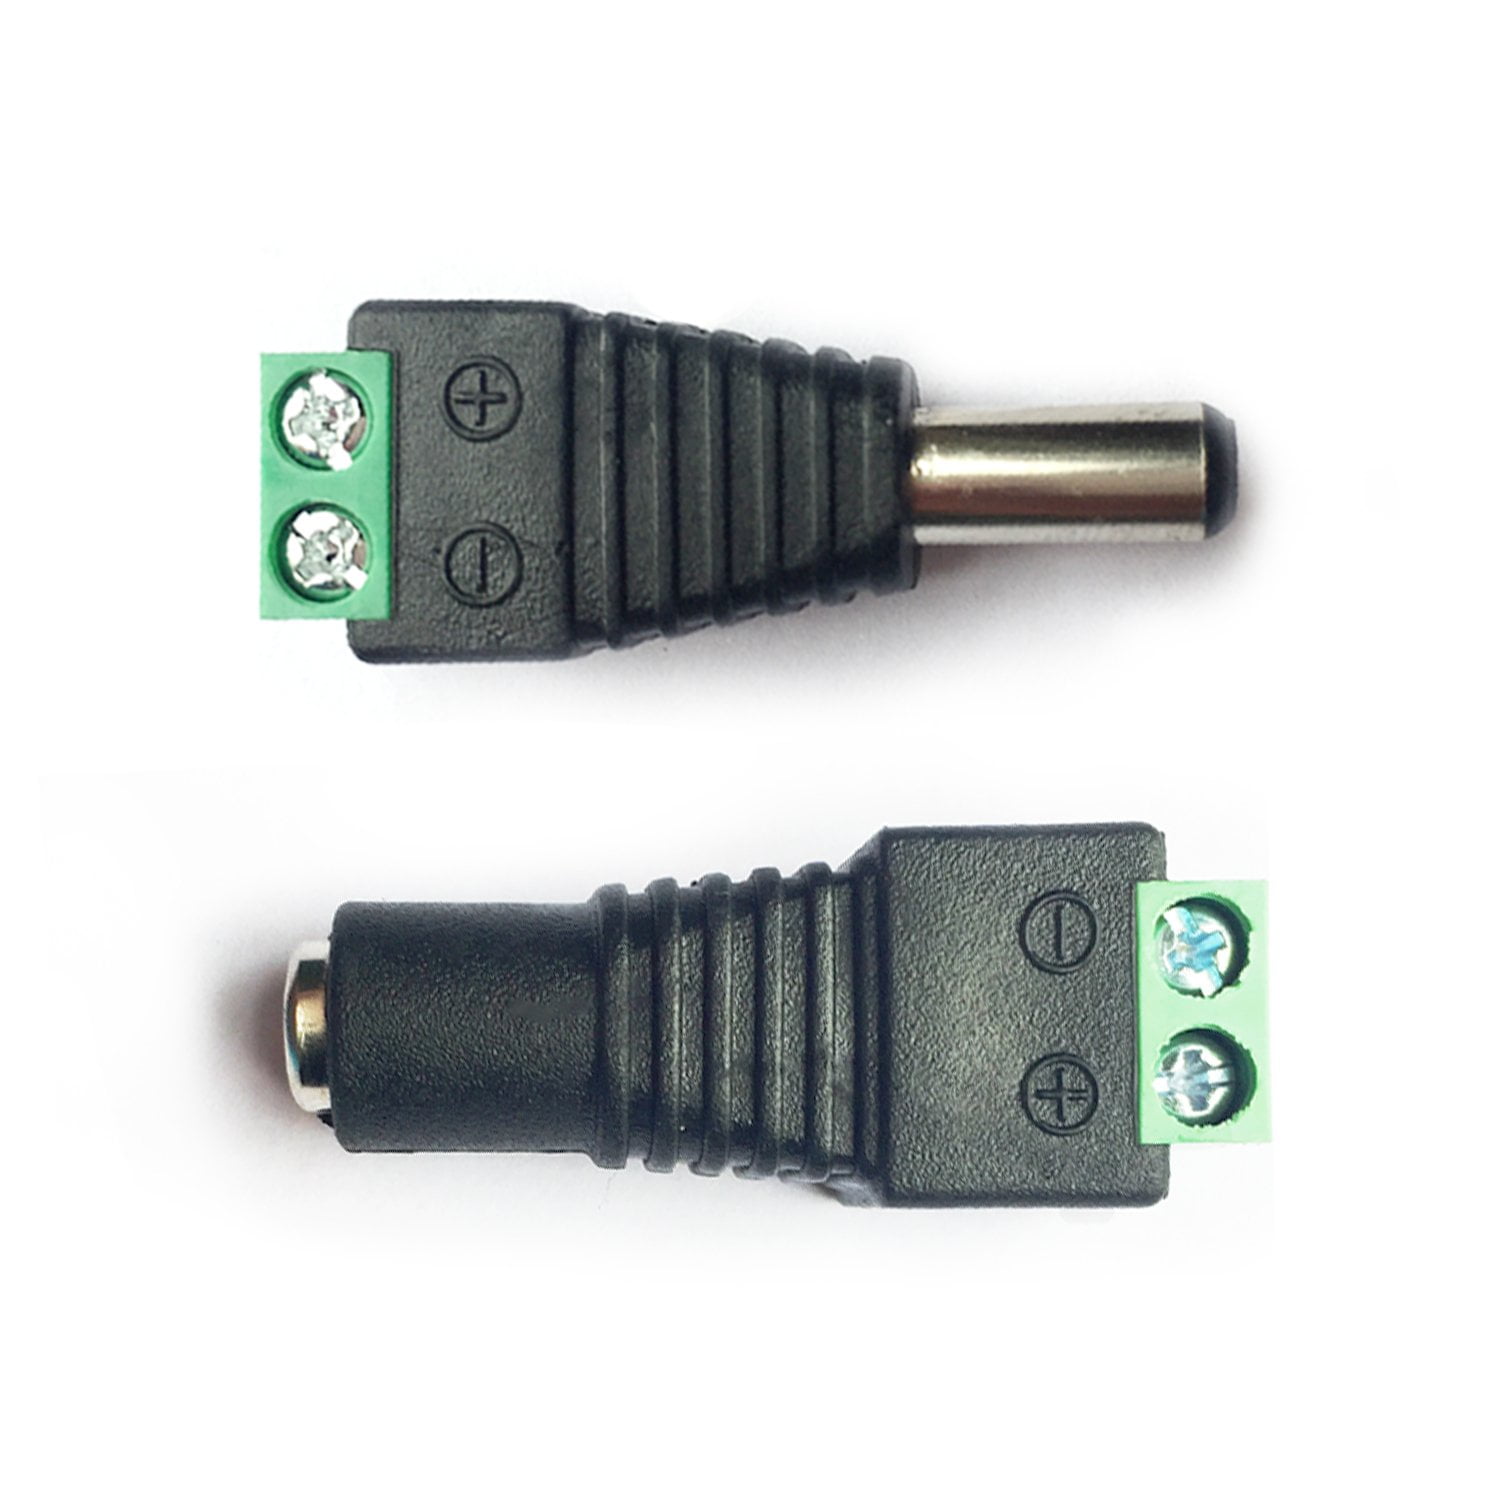 DAYKIT 10 Pairs 12V Male+Female 2.1x5.5MM DC Power Jack Plug Adapter Connector for CCTV Camera 